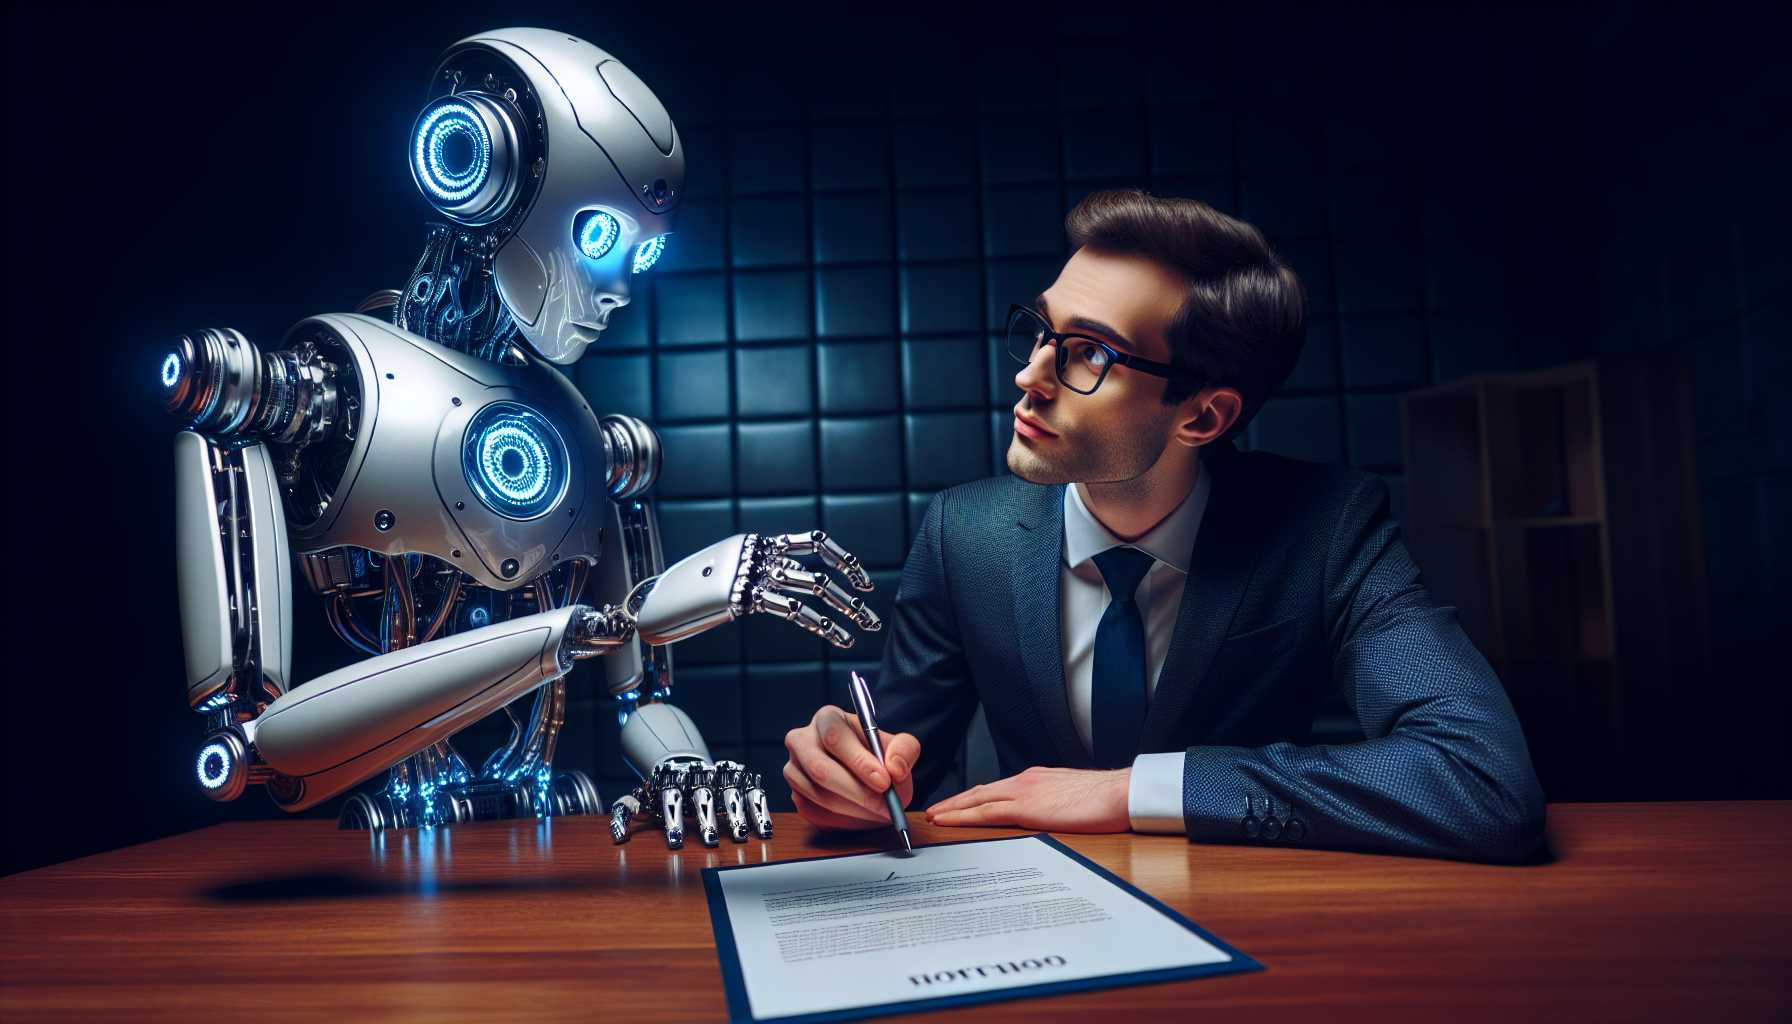 artificial intelligence robot signing a contract with a human